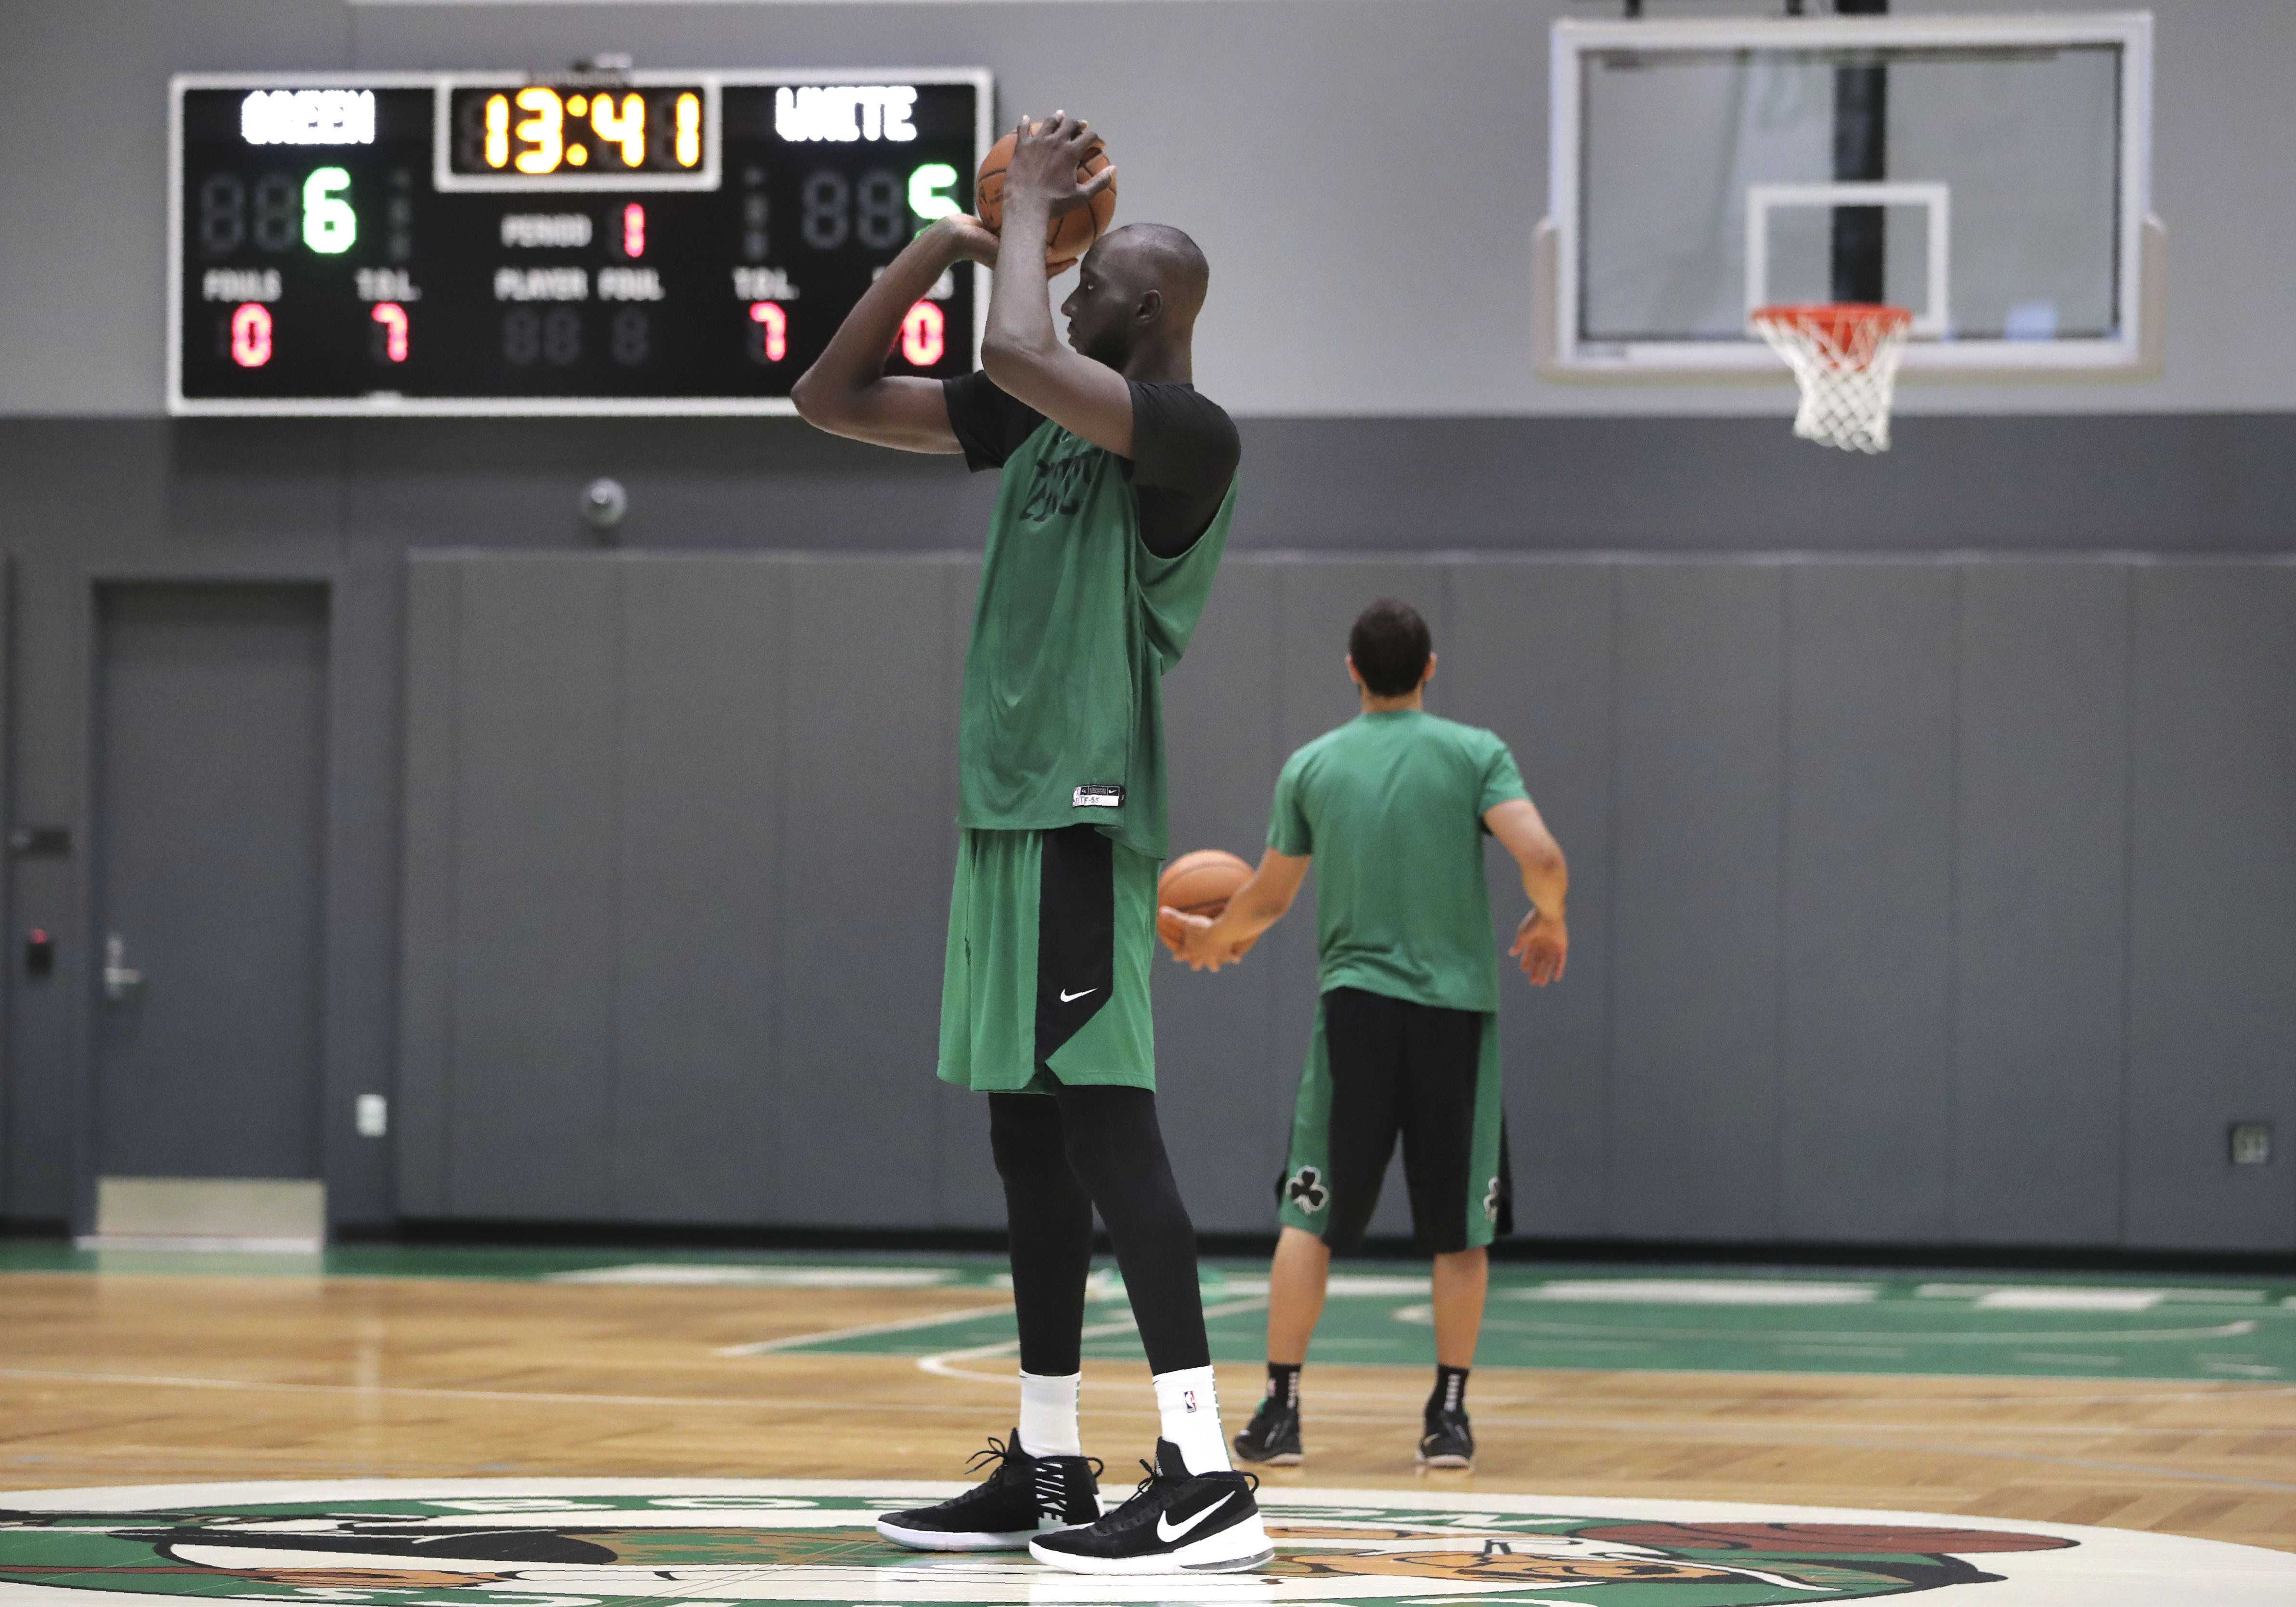 Tacko Fall's enormous shoe looks even 